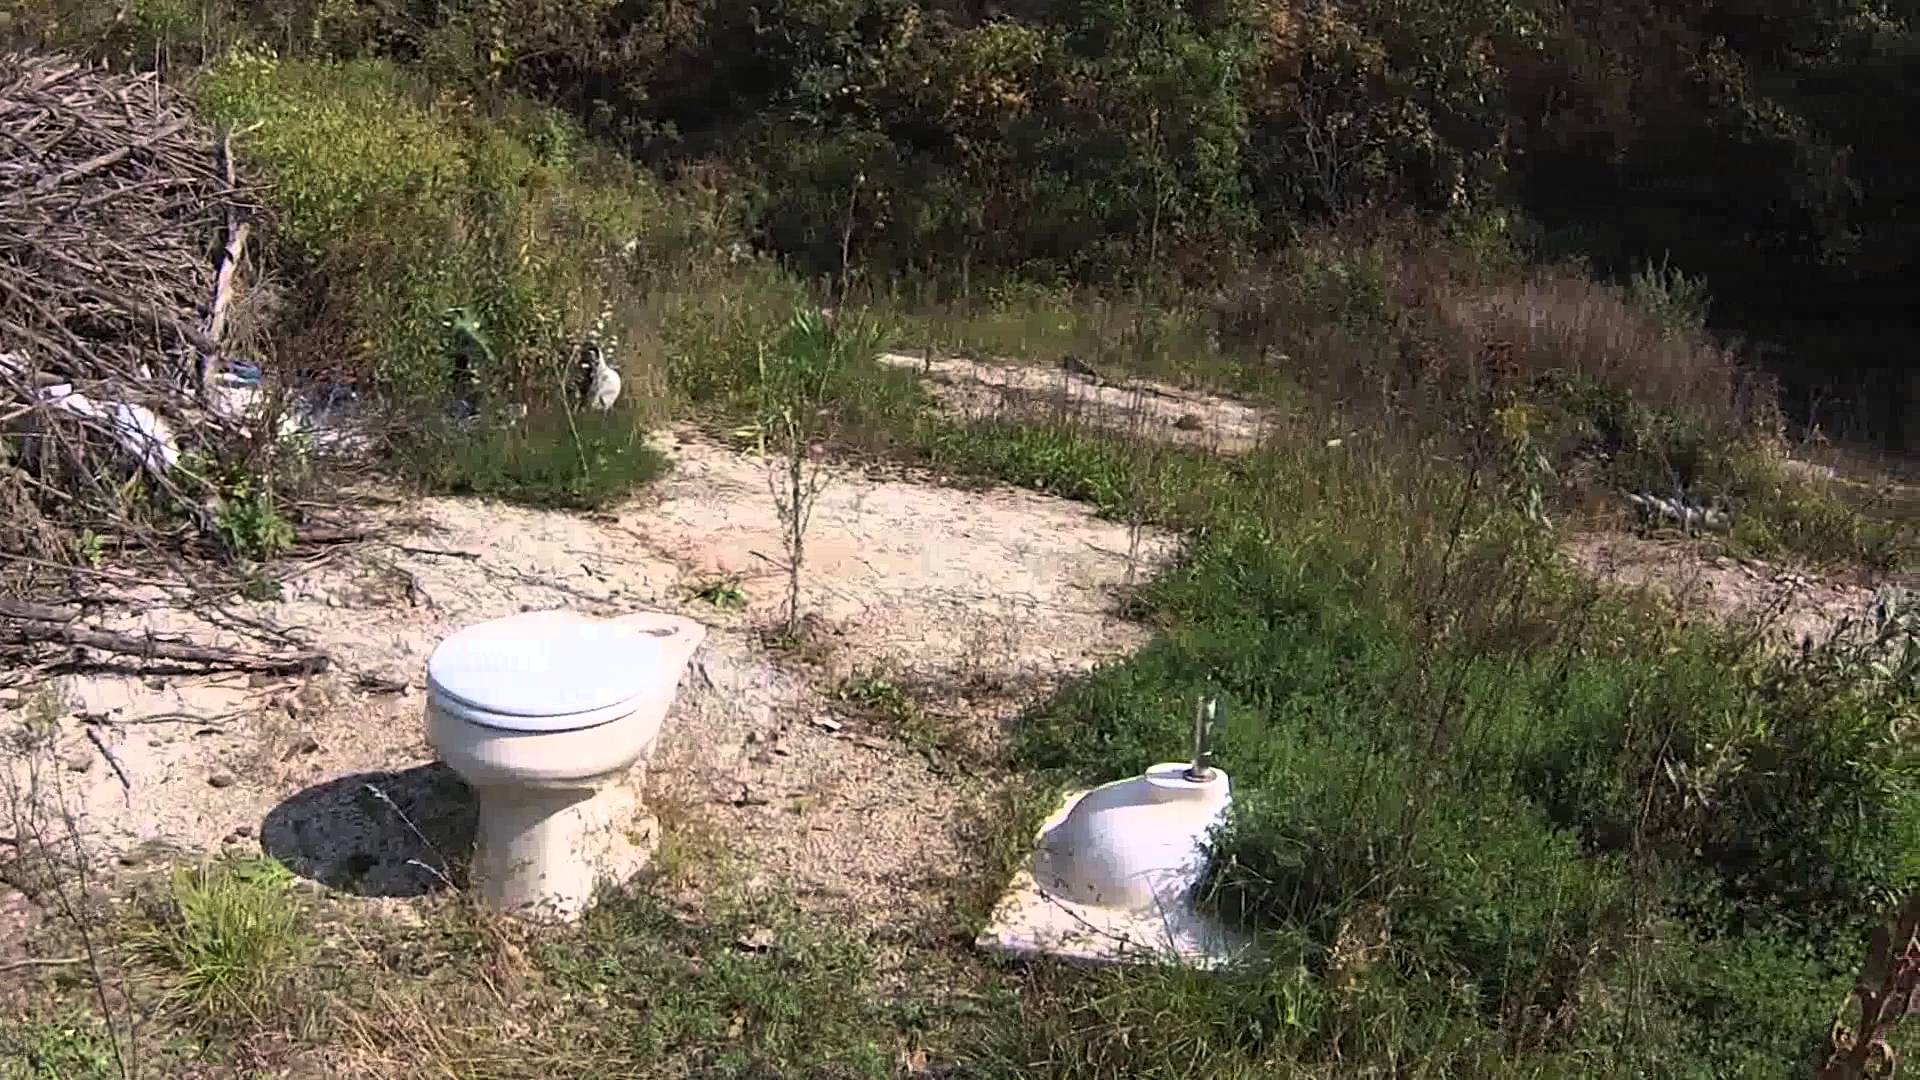 Mystery Toilet in the Middle of a Field - YouTube